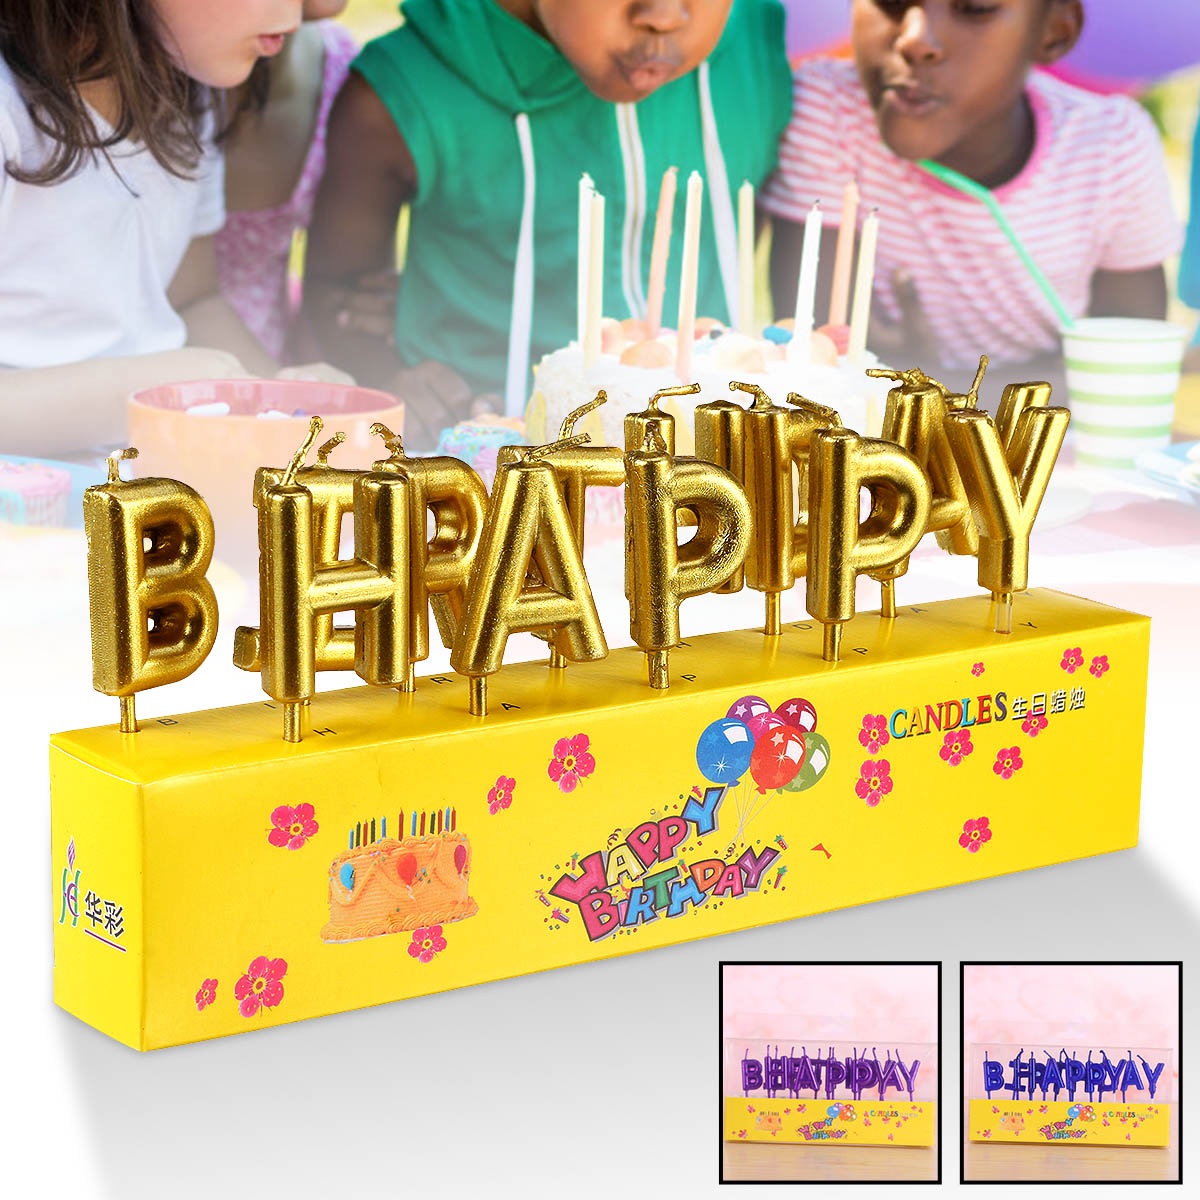 Novelty-Happy-Birthday-Candle-Unscented-Decorative-Wax-Paraffin-Colorful-Candles-for-Party-Cake-Deco-1305443-2